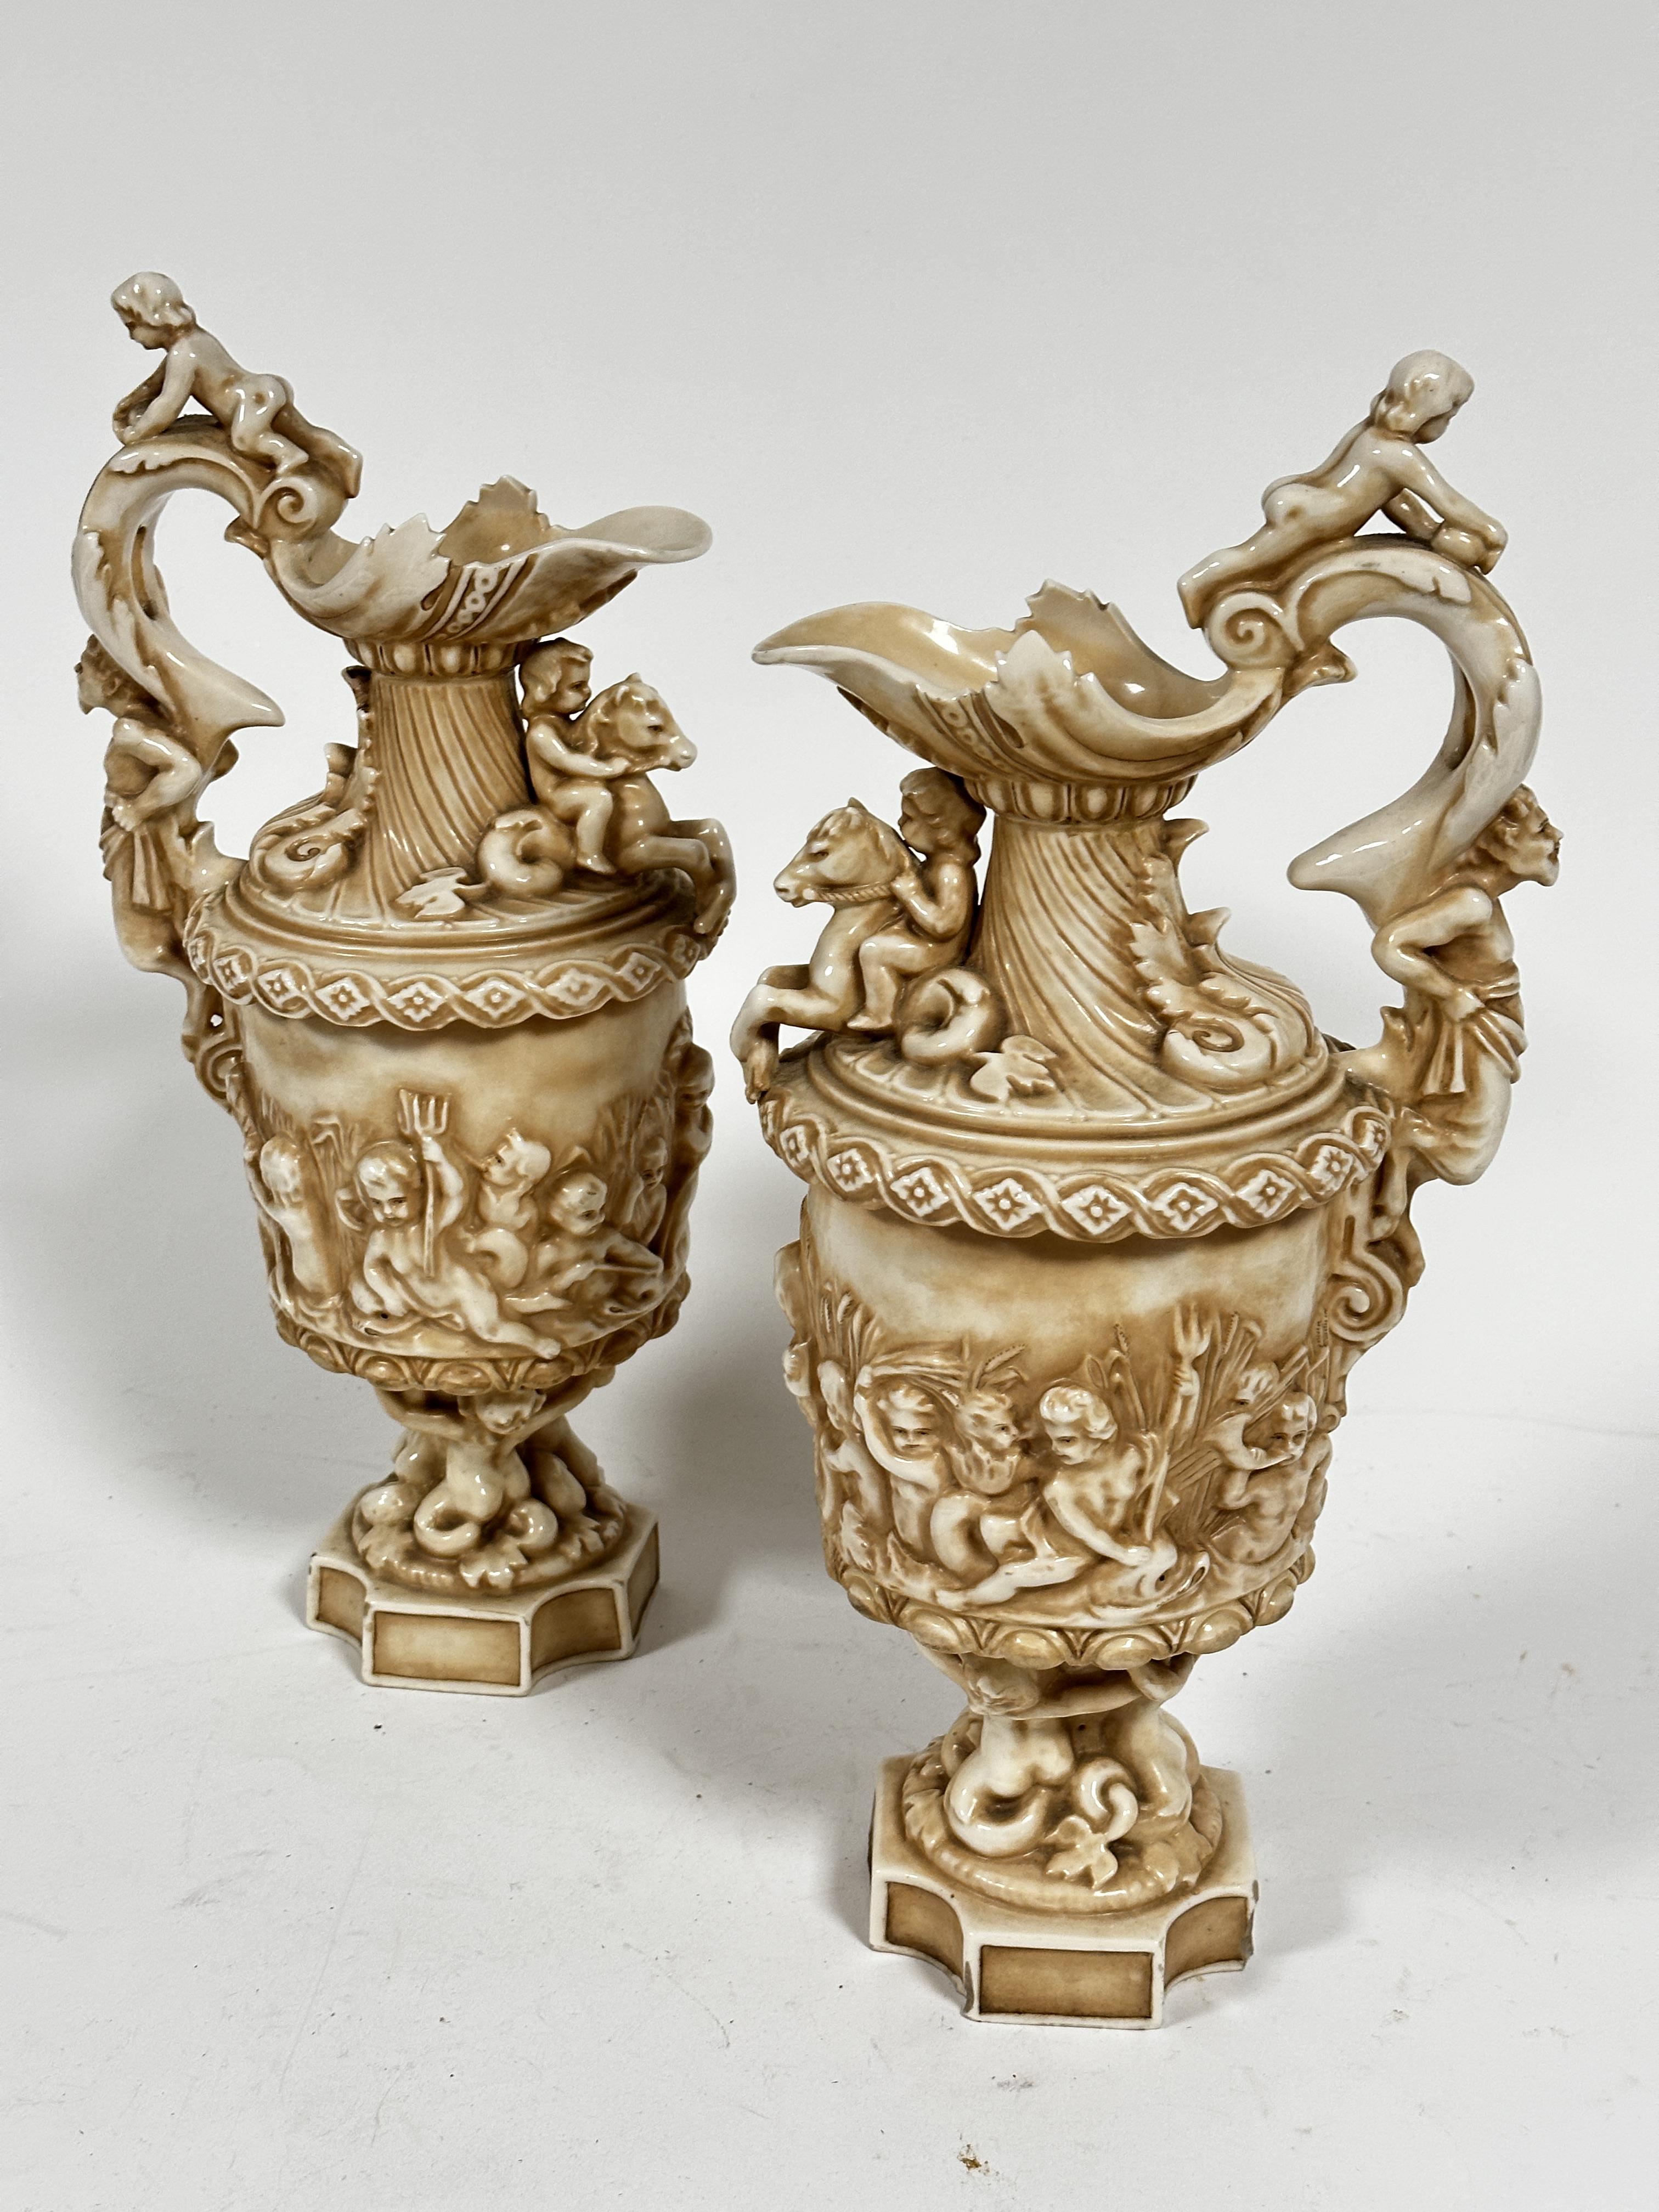 A pair of late 19thc Rudolstadt Straus & Sohne ewers, the handles mounted with cherubs with mask